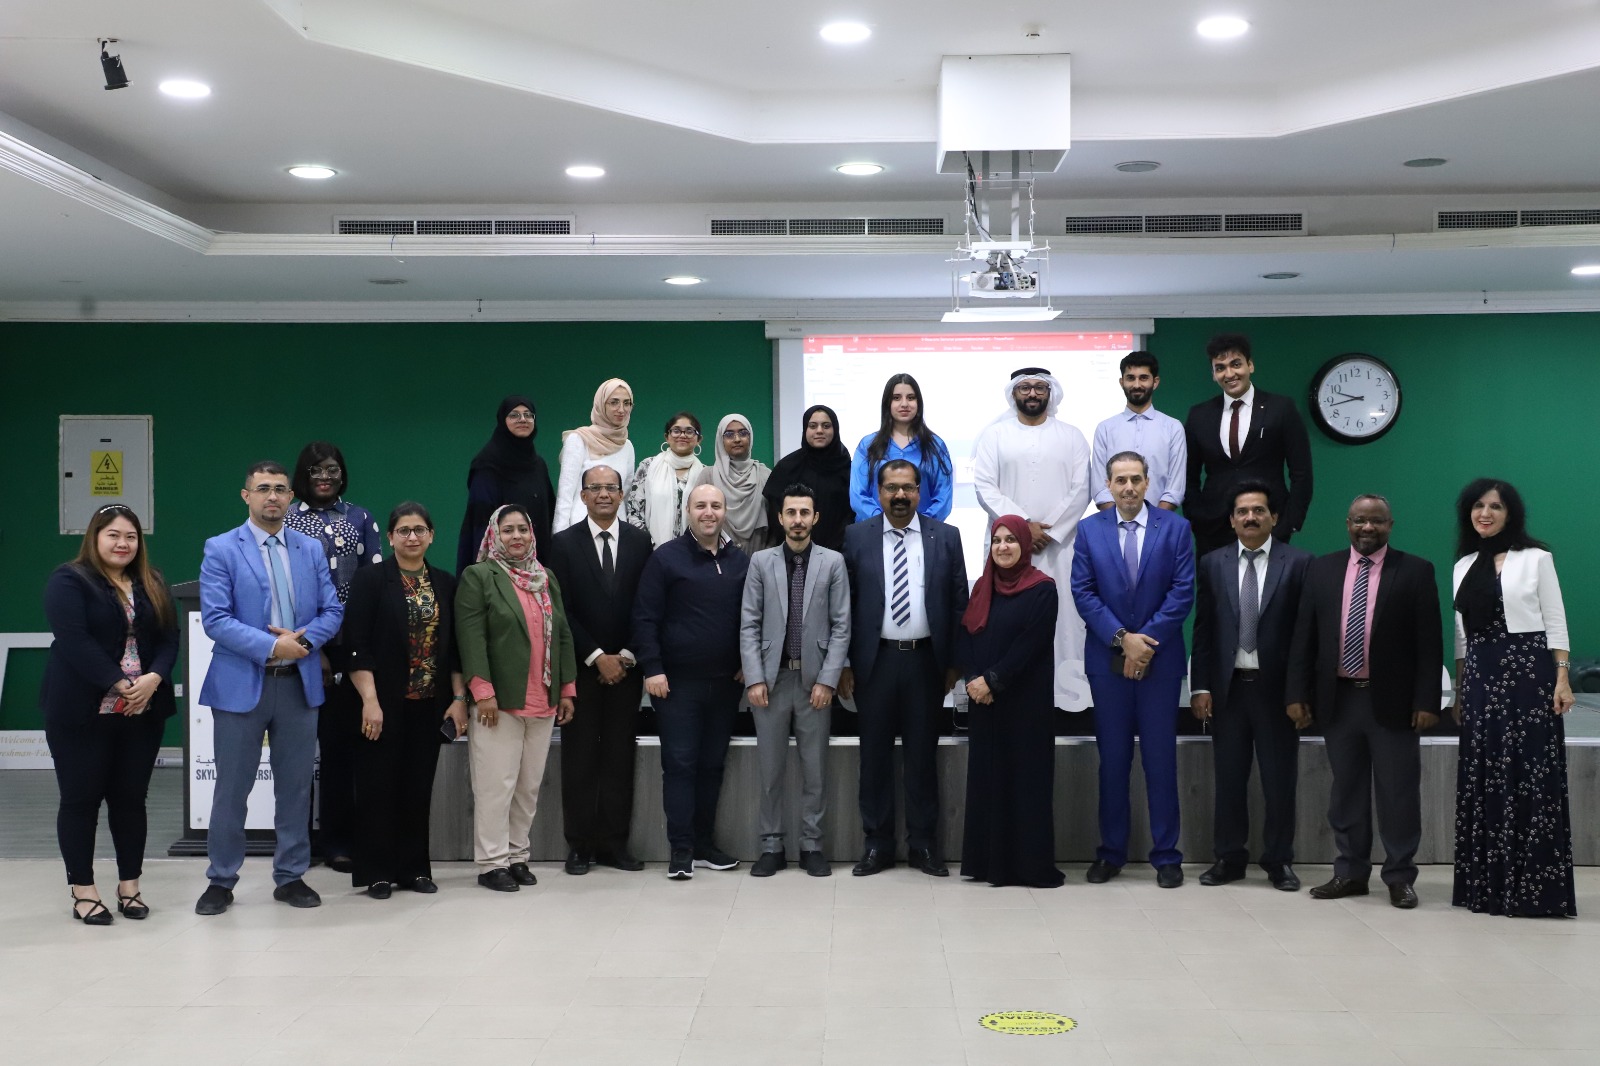 Skyline University Hosts Successful 10th Student Research Seminar on Strategic Management and Cyber Security